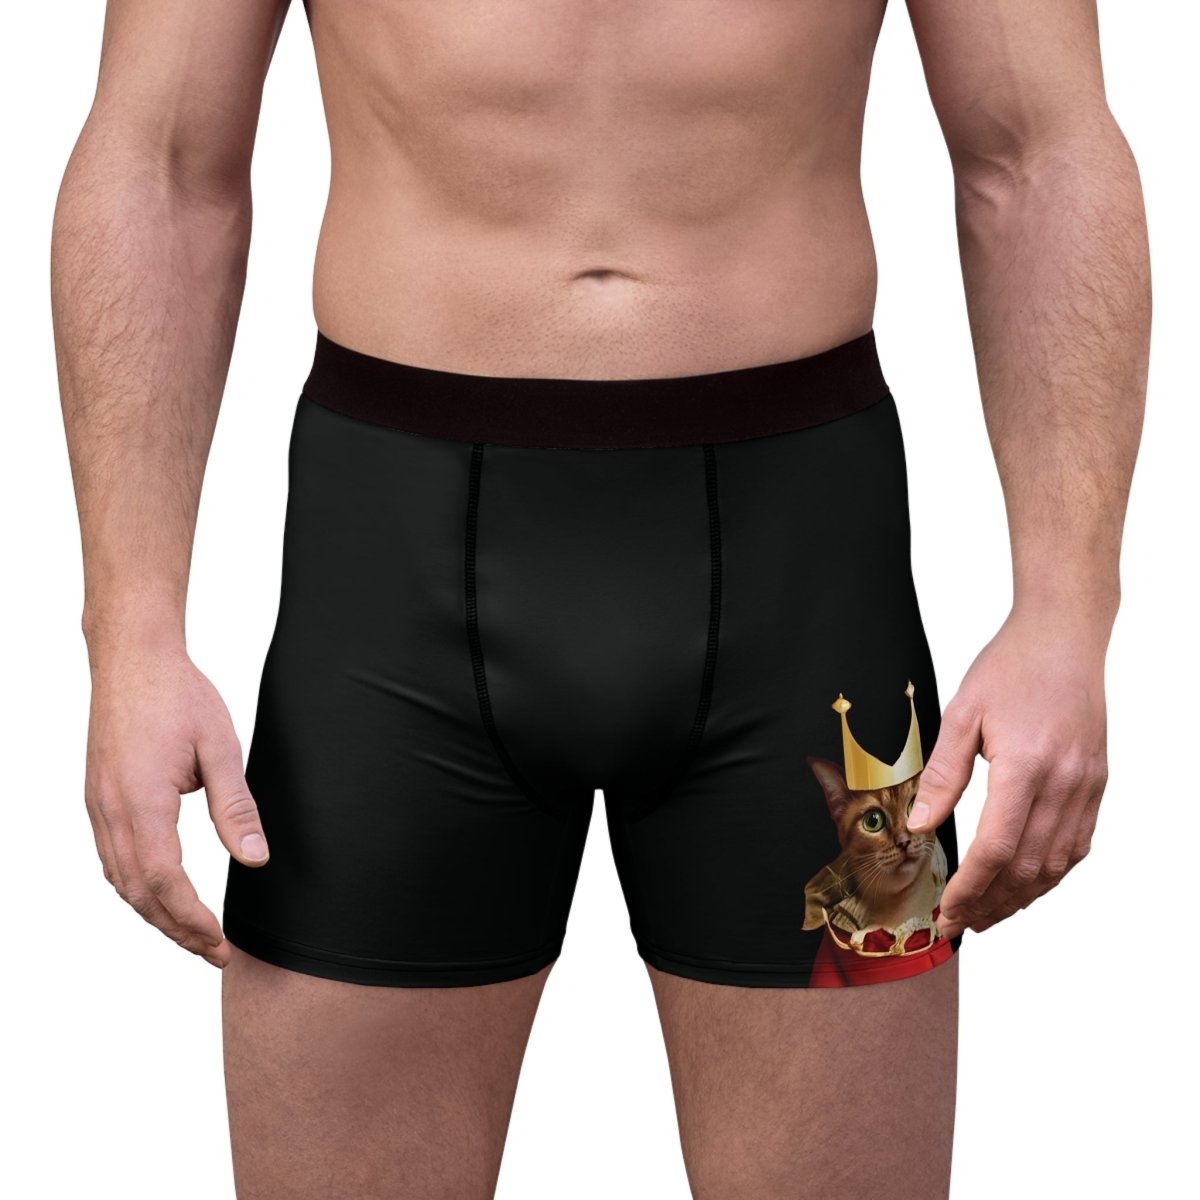 Royal Cat Men's Boxer Briefs - Style A - DarzyStore